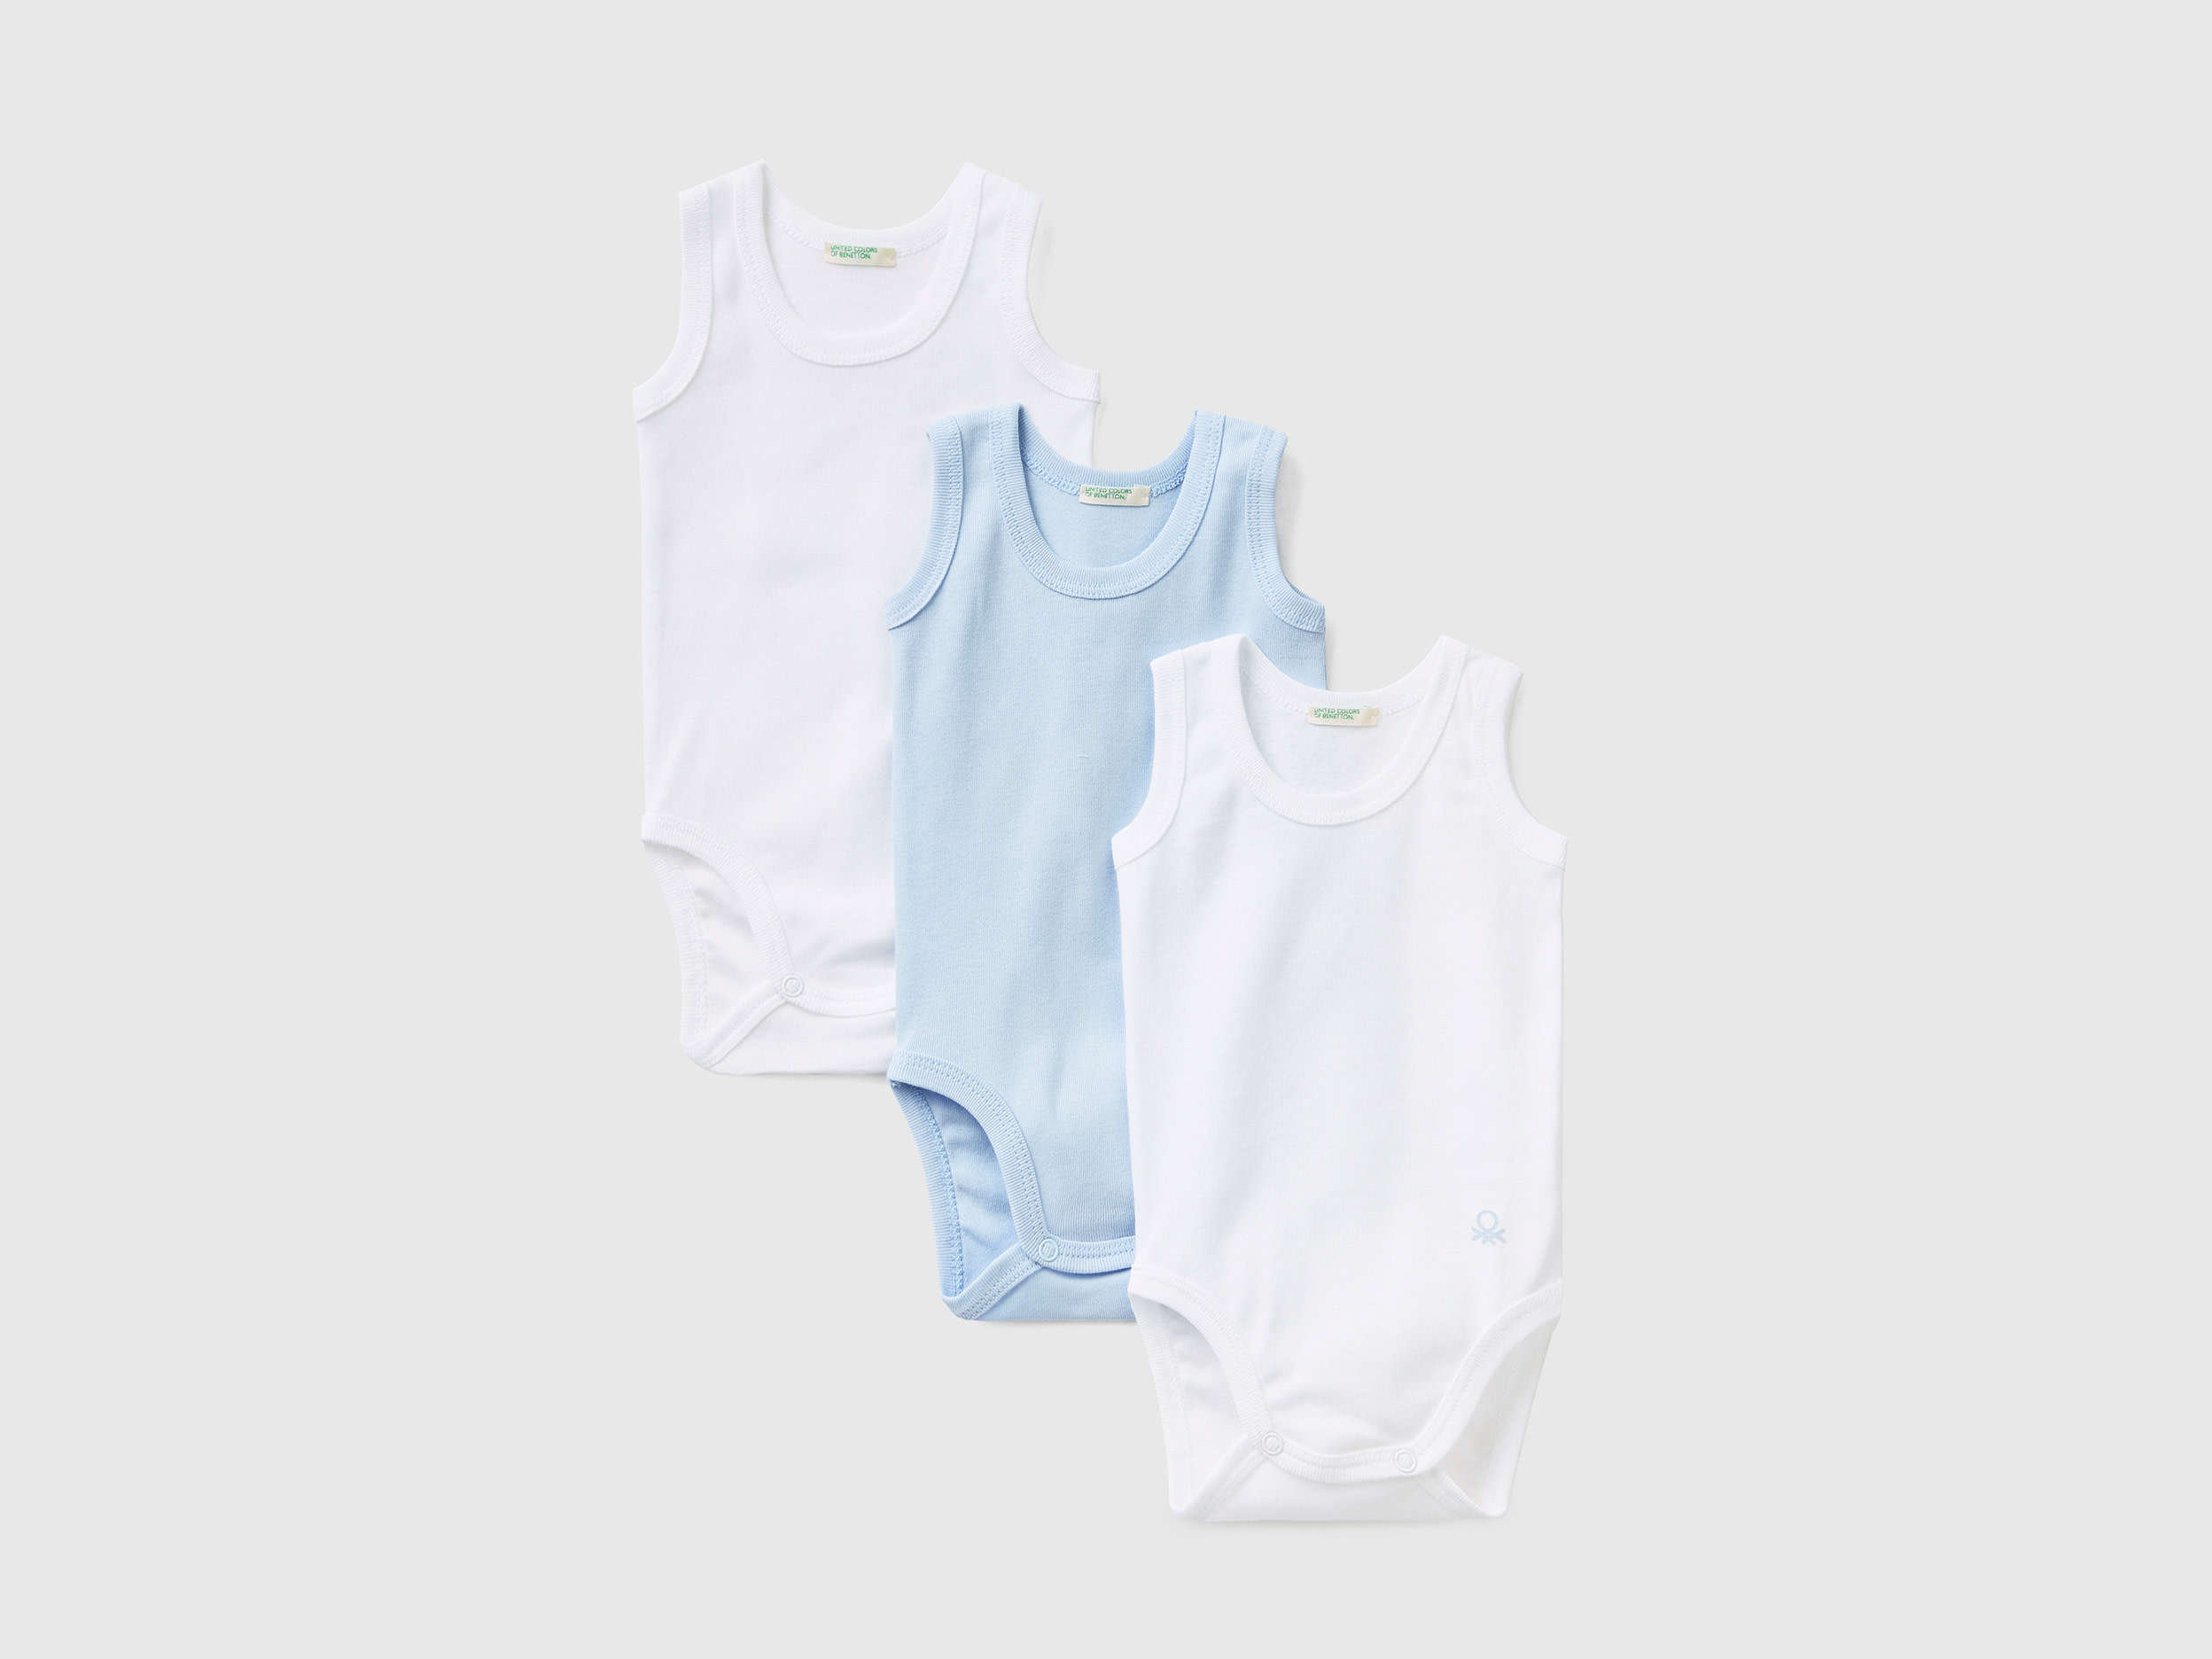 Image of Benetton, Three Solid Color Tank Top Bodysuits, size 90, Light Blue, Kids